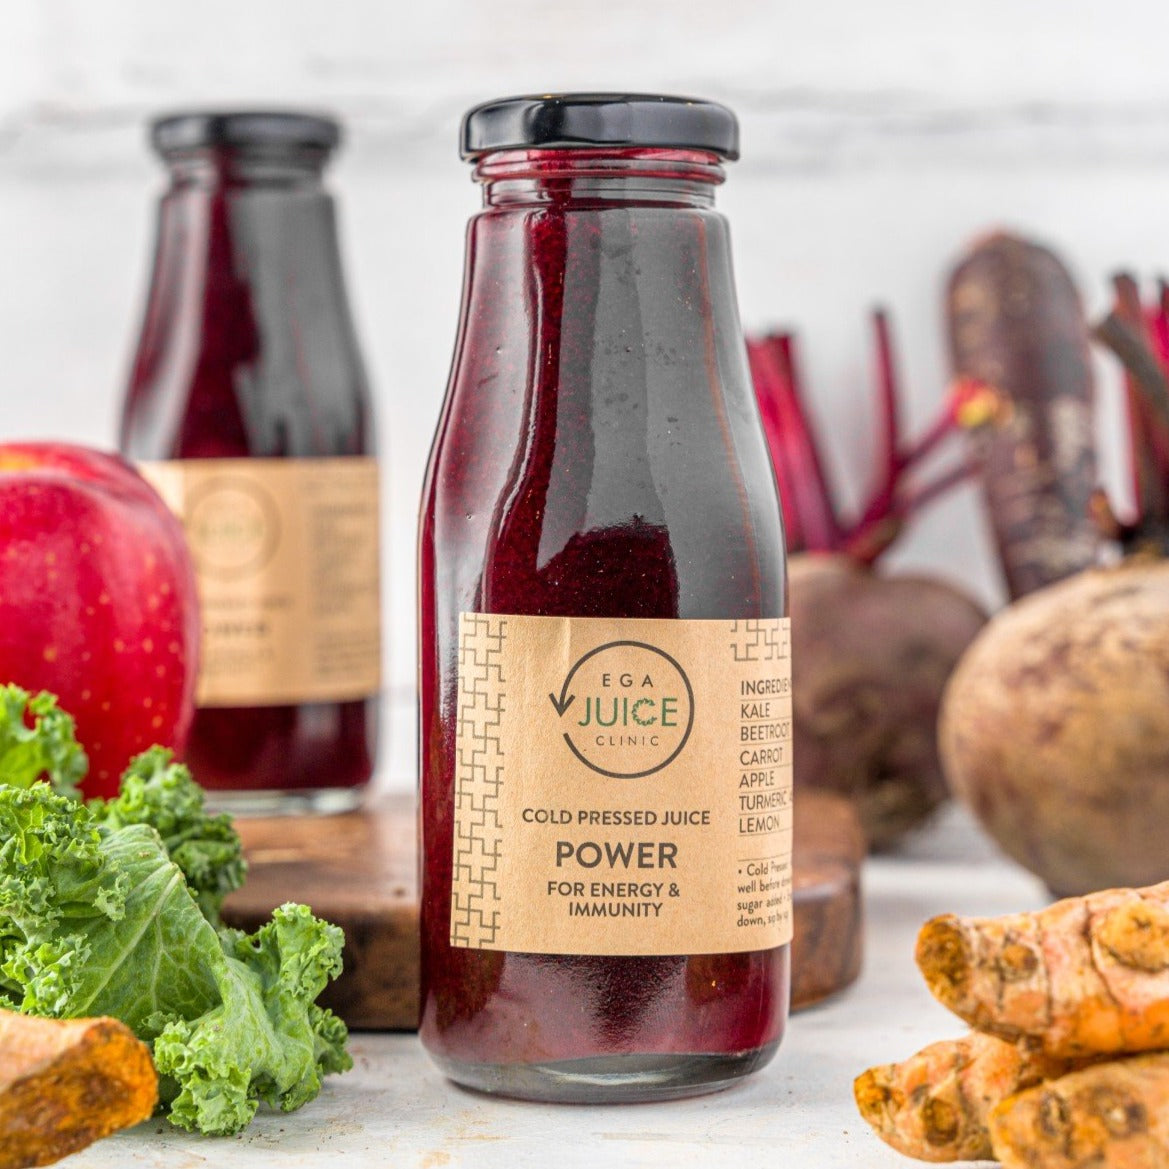 Power Juice - for building energy and immunity